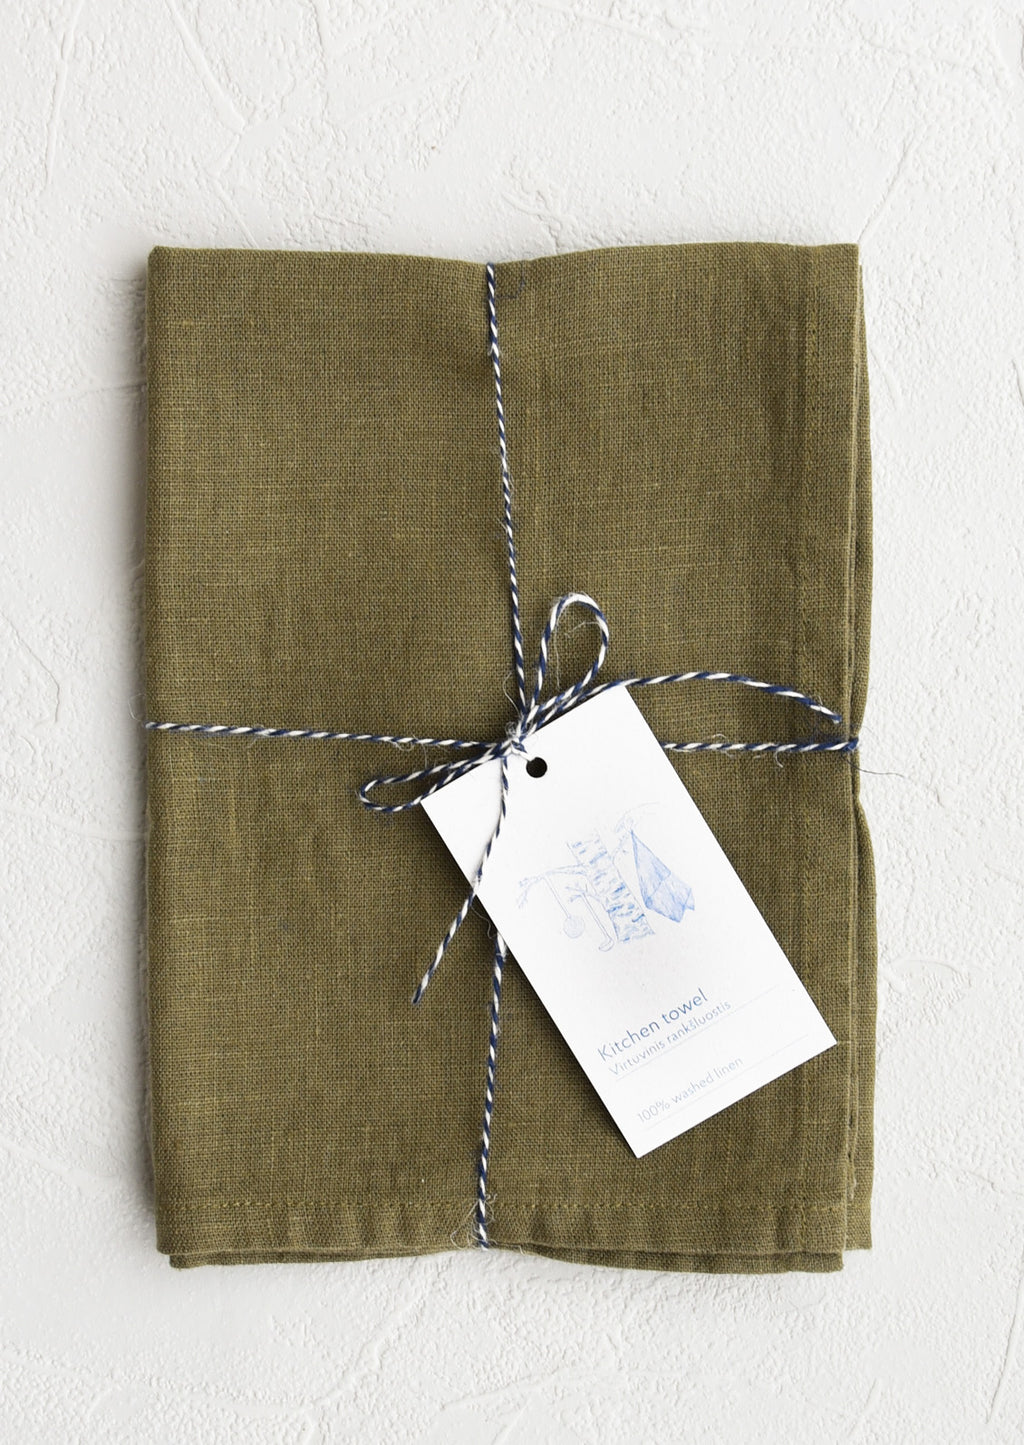 Olive: A folded faded olive colored linen tea towel tied in baker's twine with a decorative hangtag